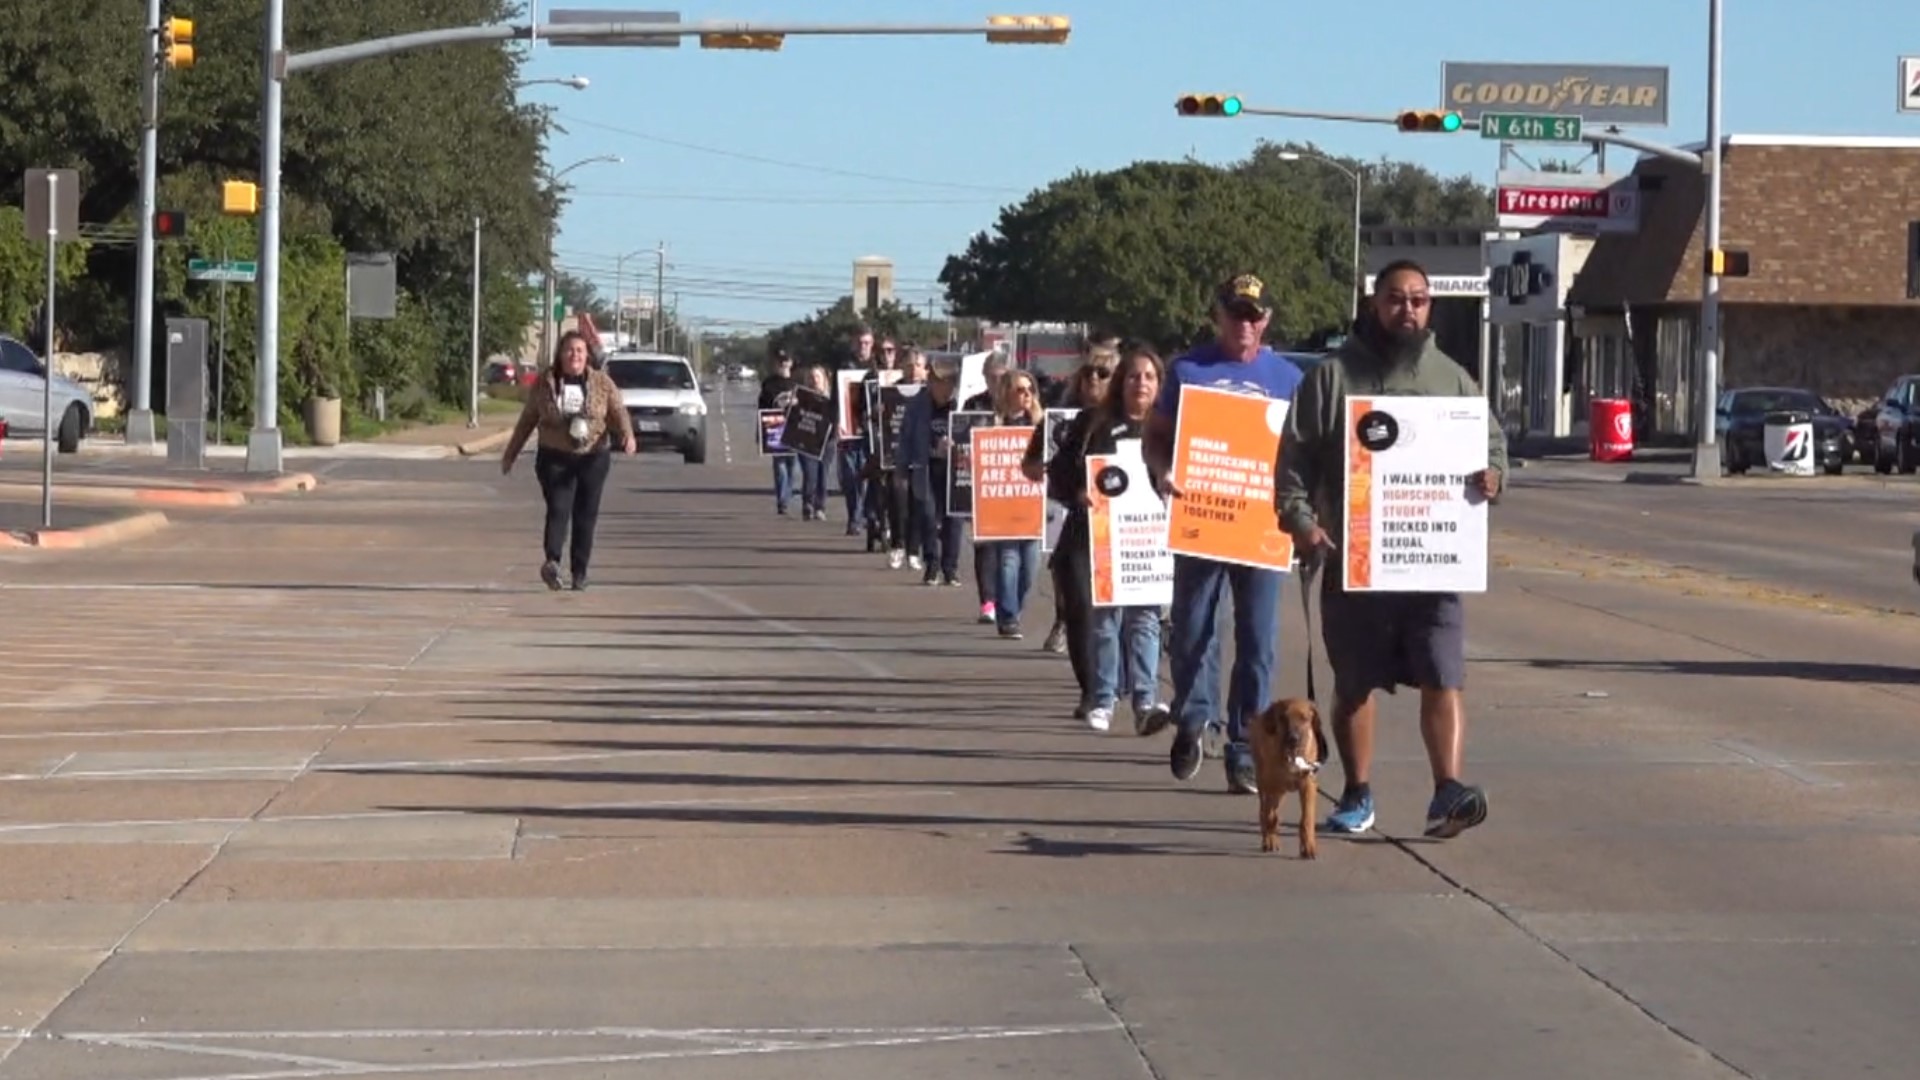 Saturday, Oct. 14, Beyond Trafficking hosted its annual Walk for Freedom, in conjunction with A21.